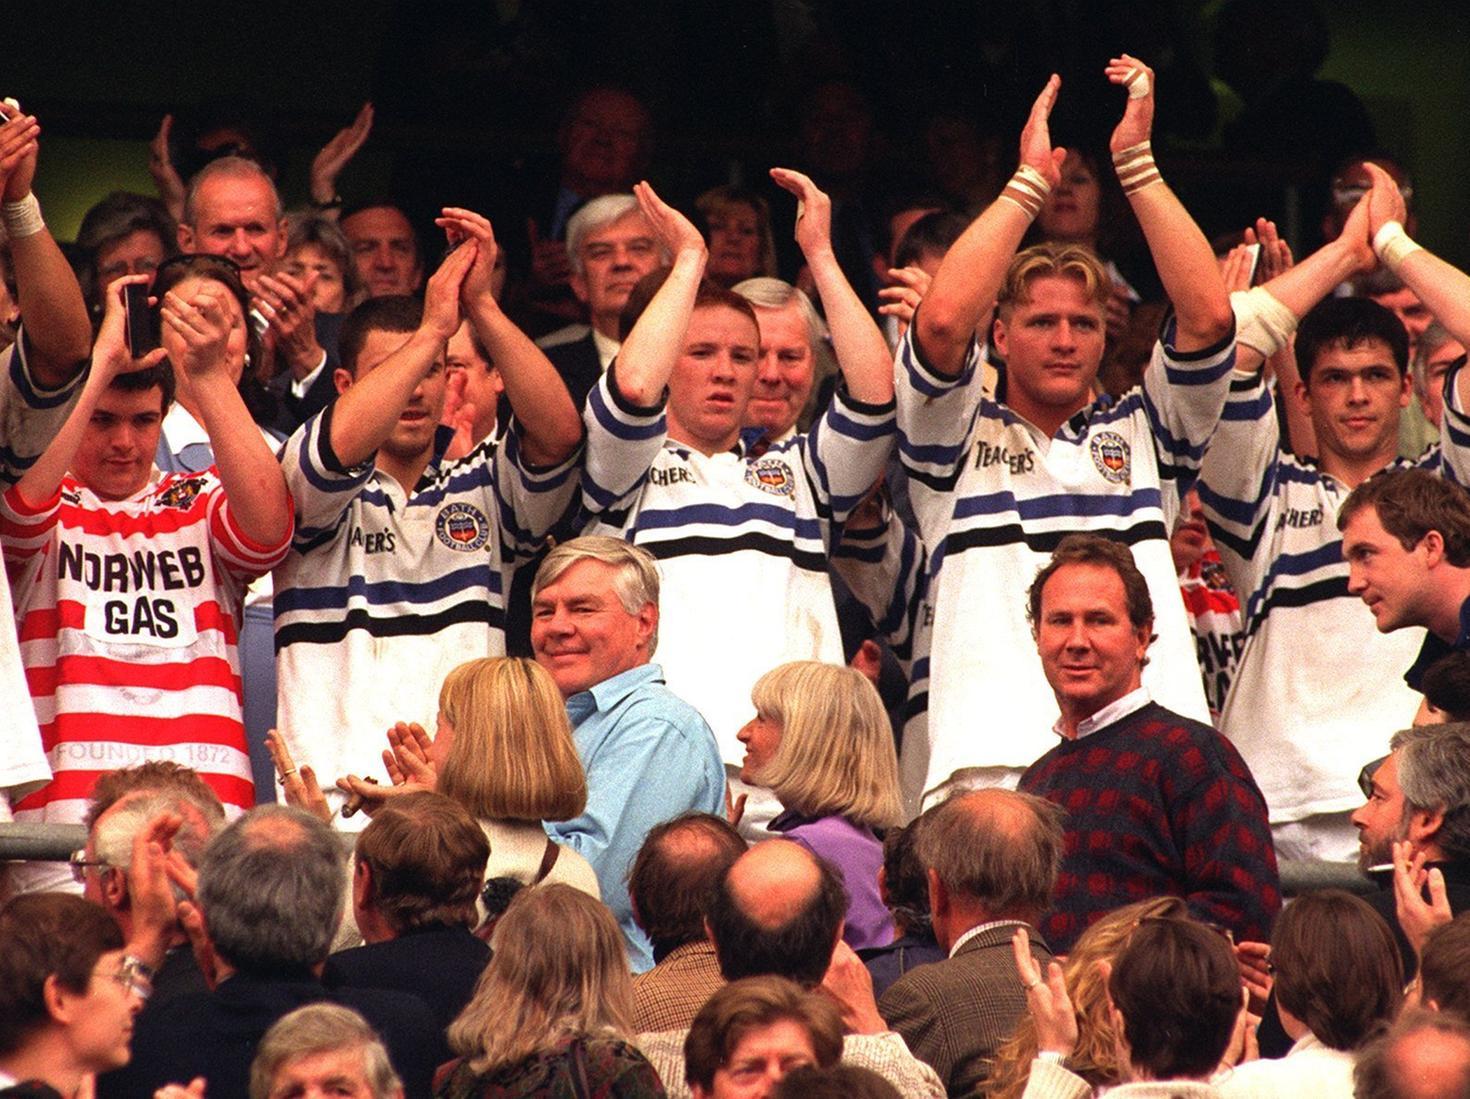 26 pictures from Wigans union game with Bath 25 years ago